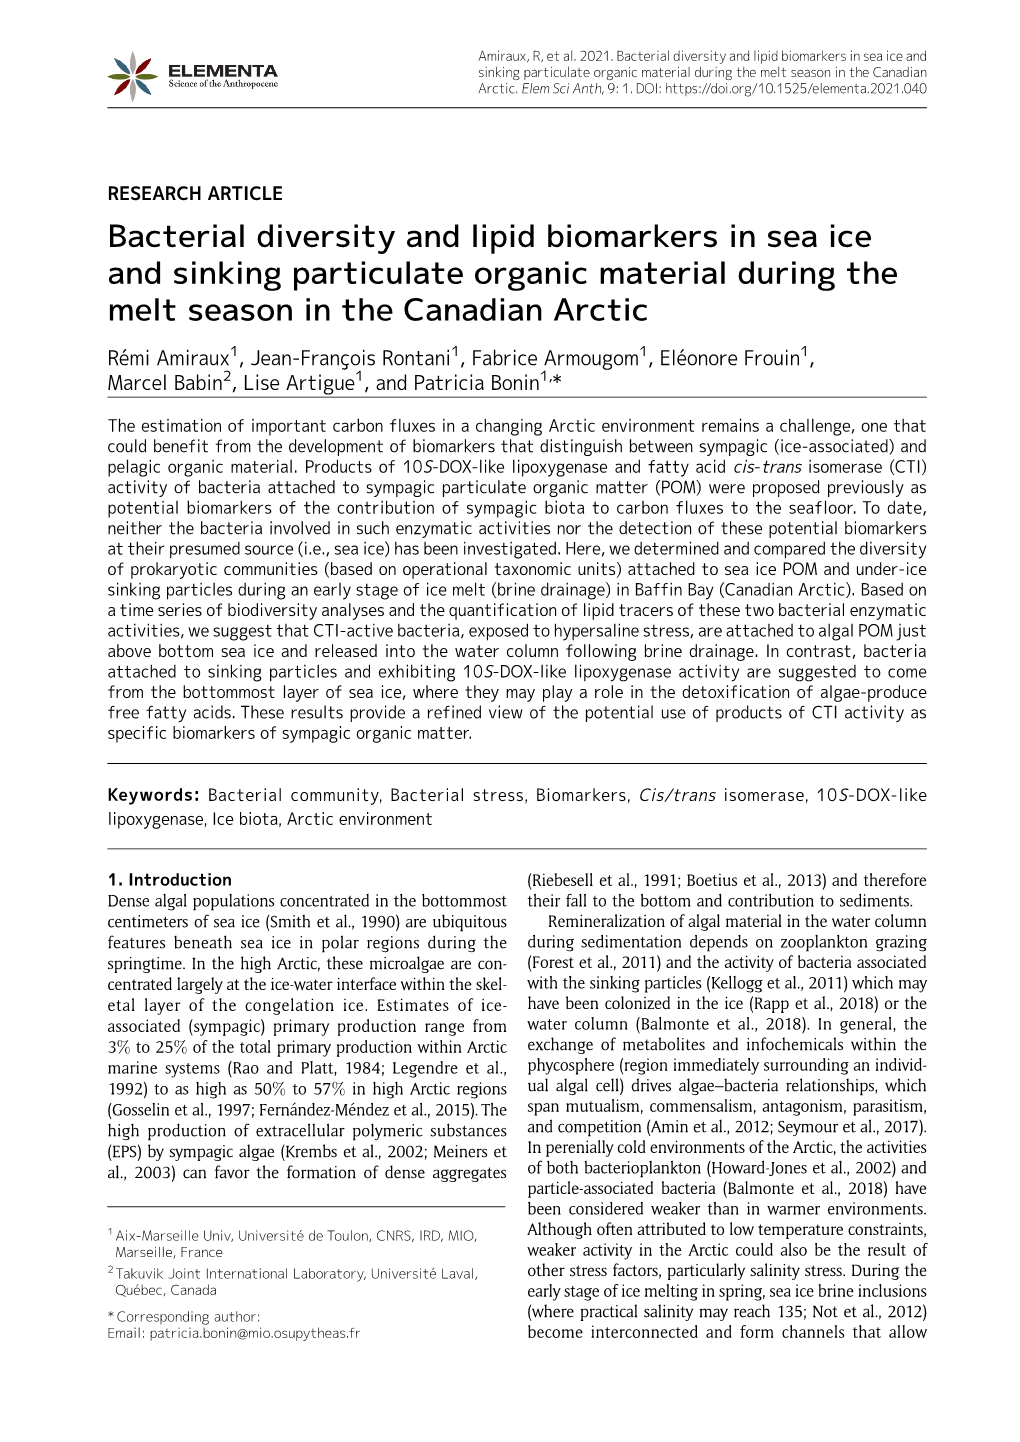 Bacterial Diversity and Lipid Biomarkers in Sea Ice and Sinking Particulate Organic Material During the Melt Season in the Canadian Arctic